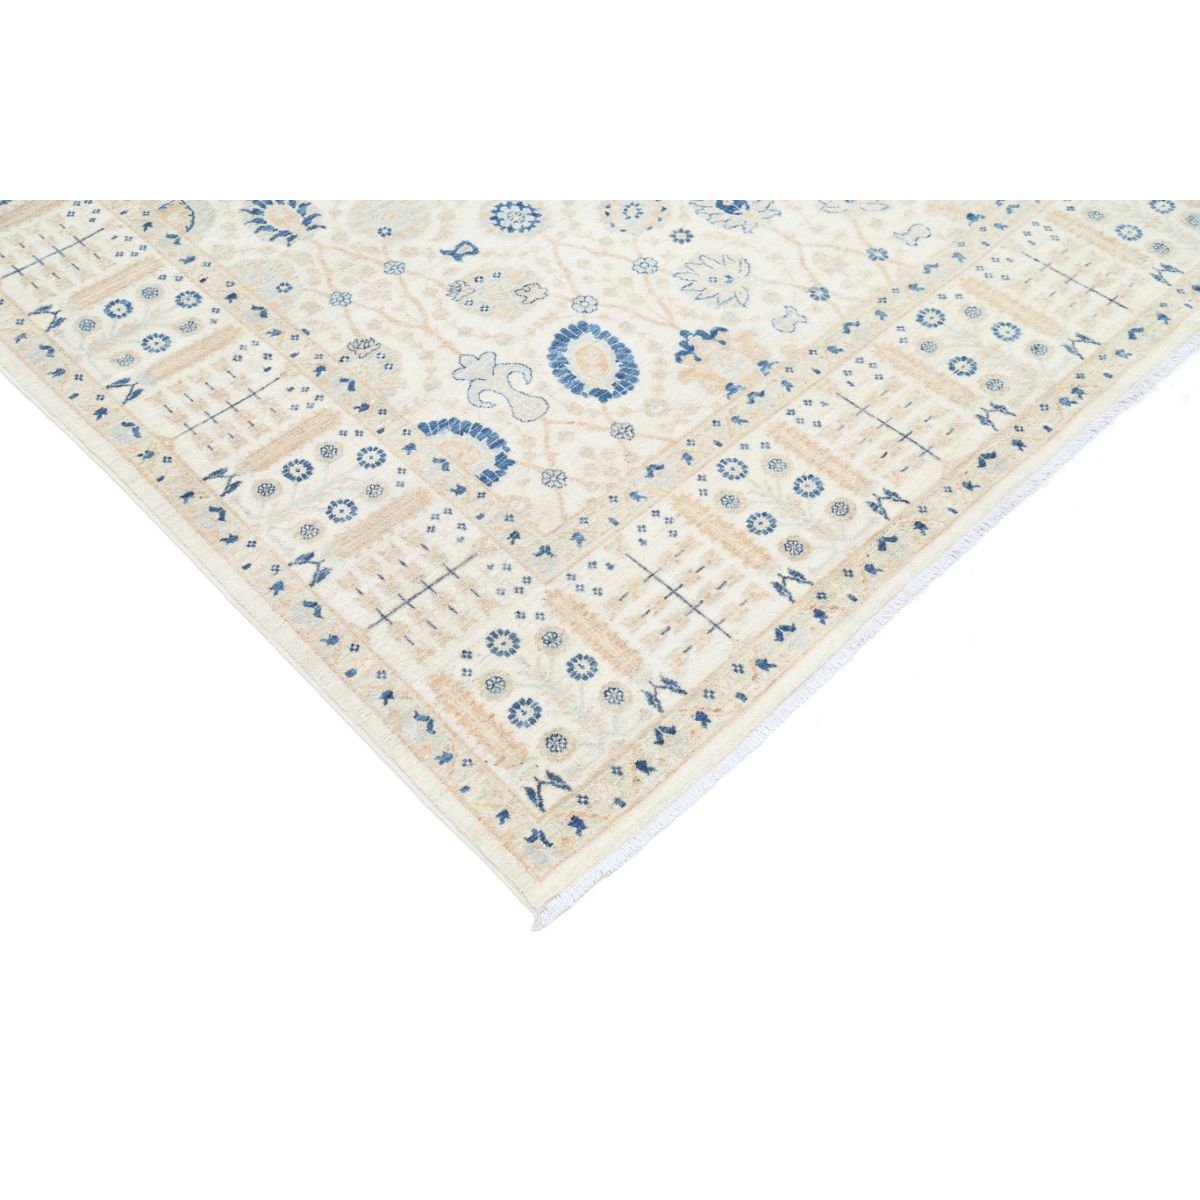 Ariana 6'5" X 9'10" Wool Hand-Knotted Rug